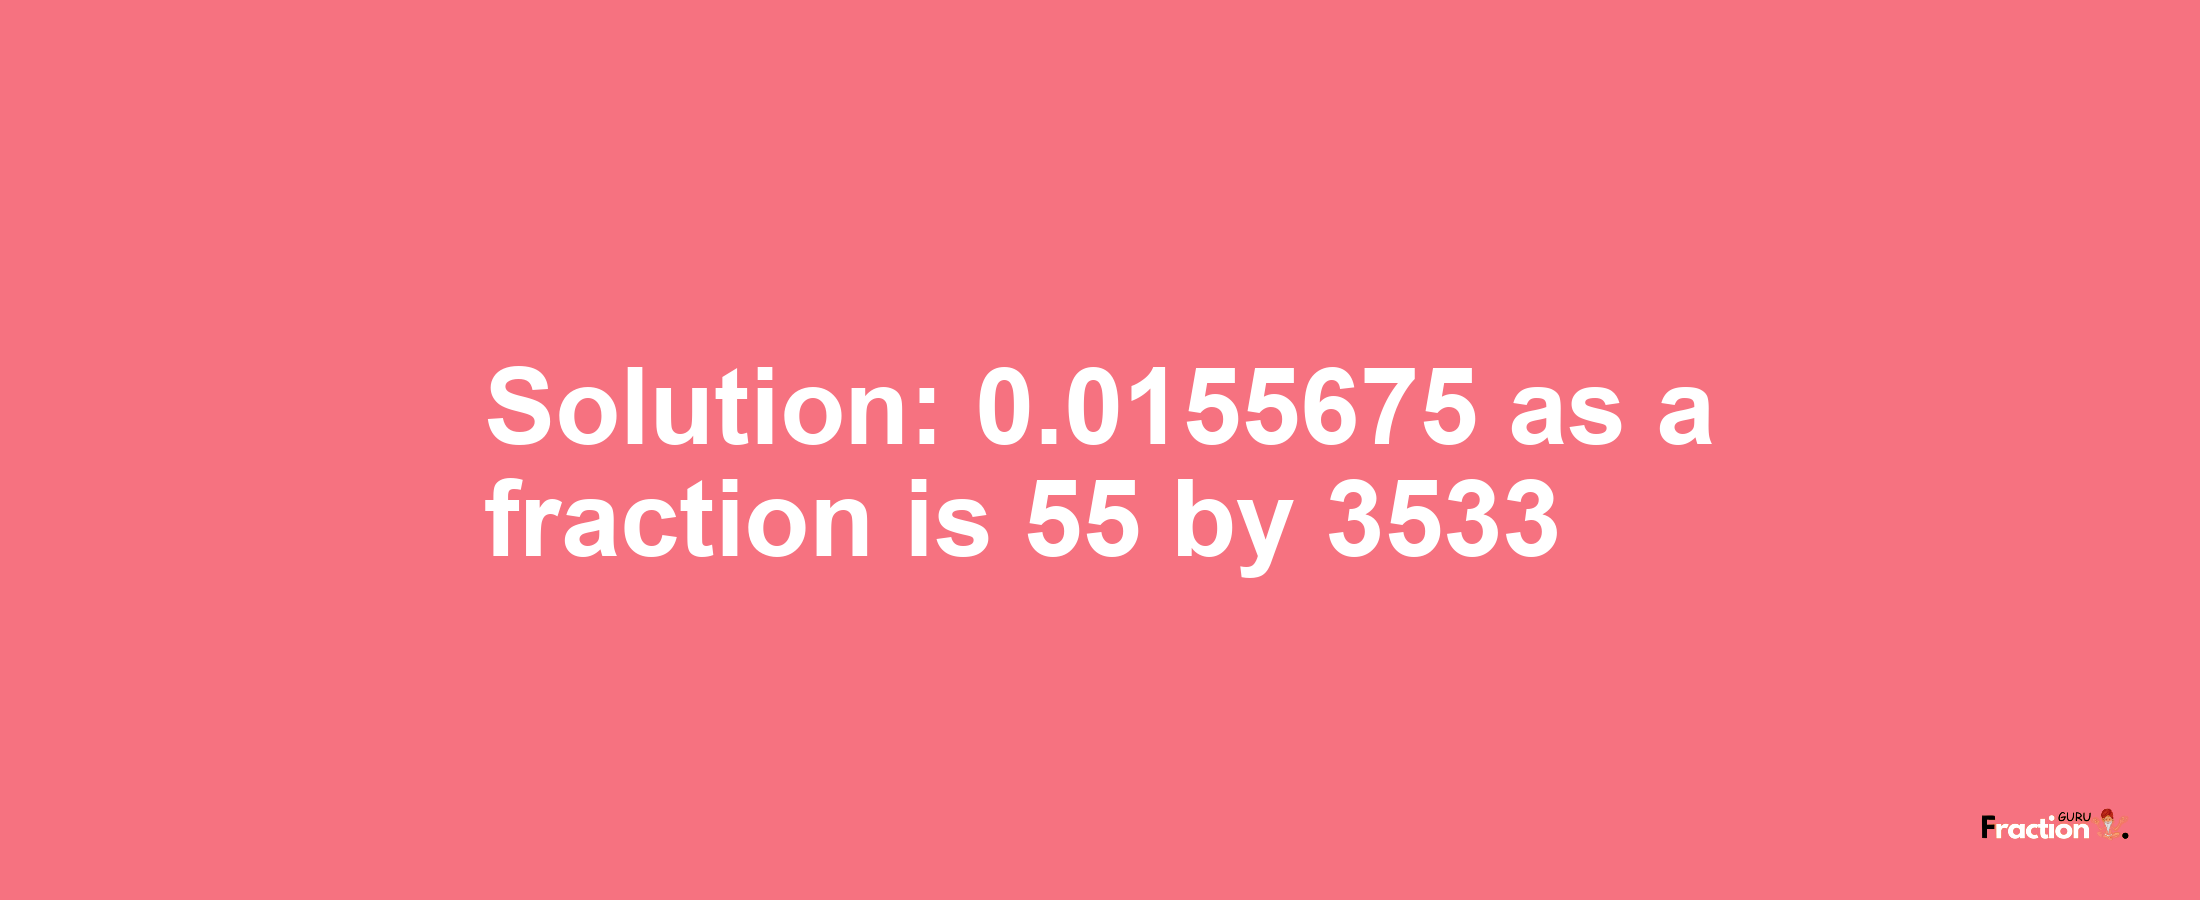 Solution:0.0155675 as a fraction is 55/3533